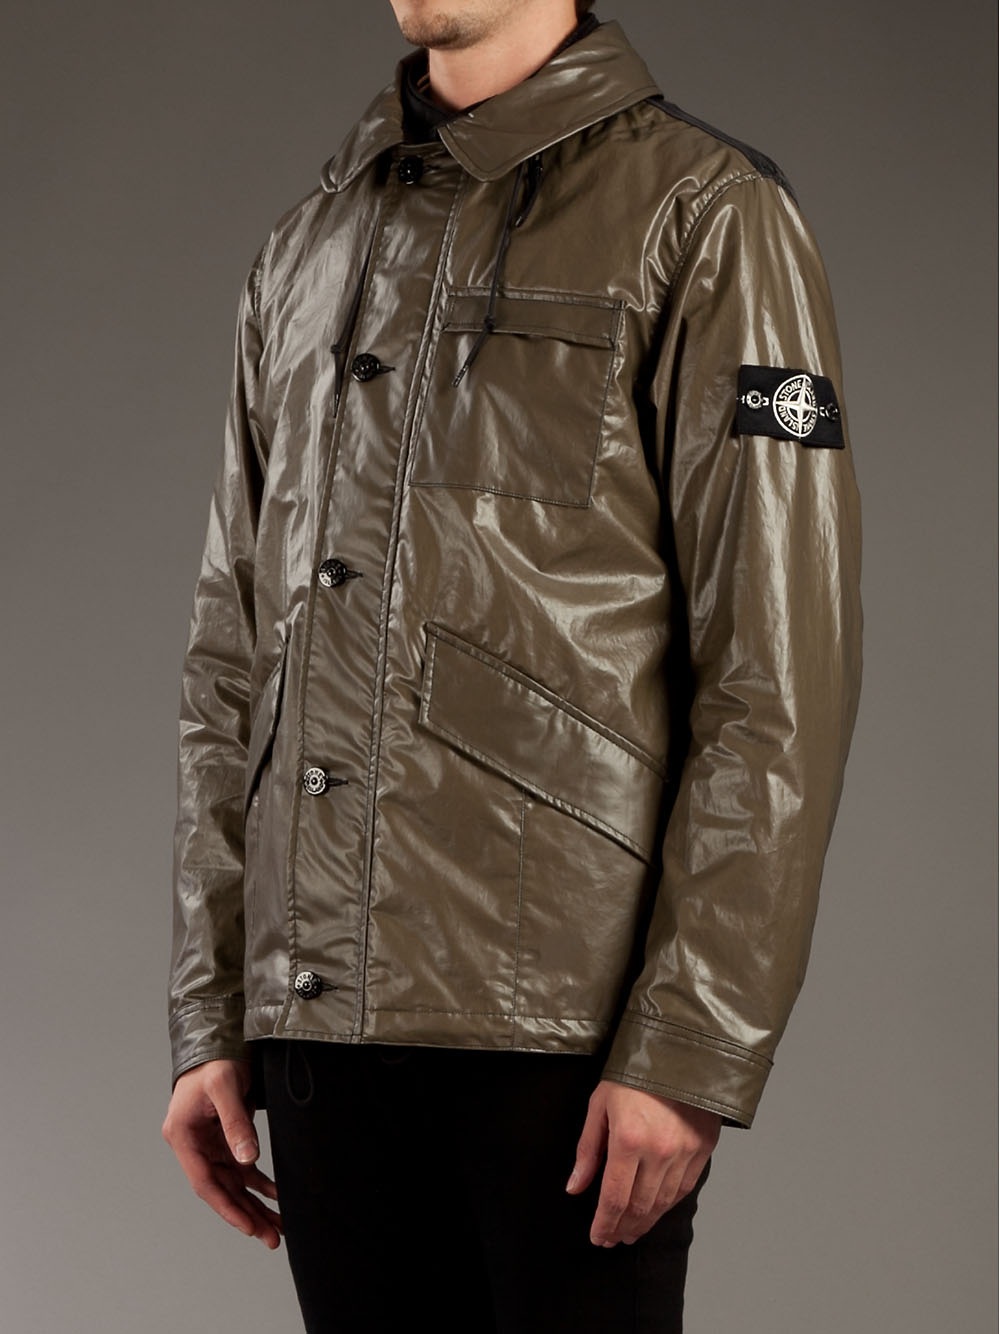 Stone Island Ice Jacket in Brown for Men - Lyst